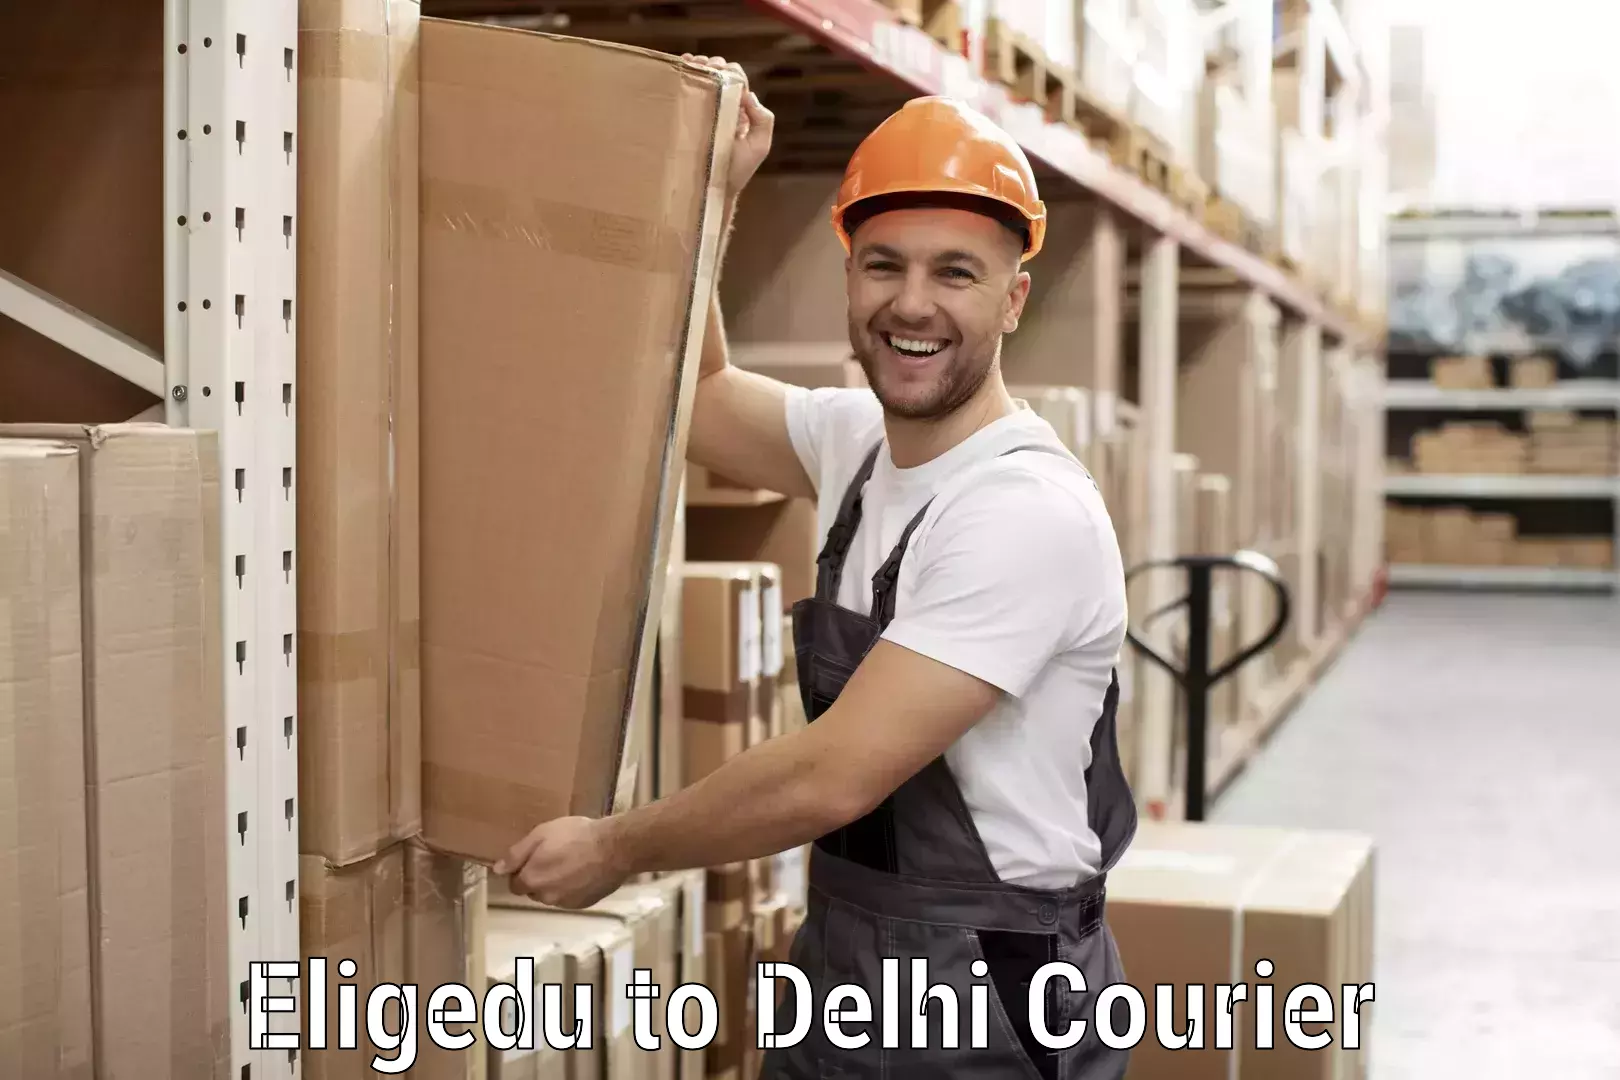 Courier membership in Eligedu to Lodhi Road